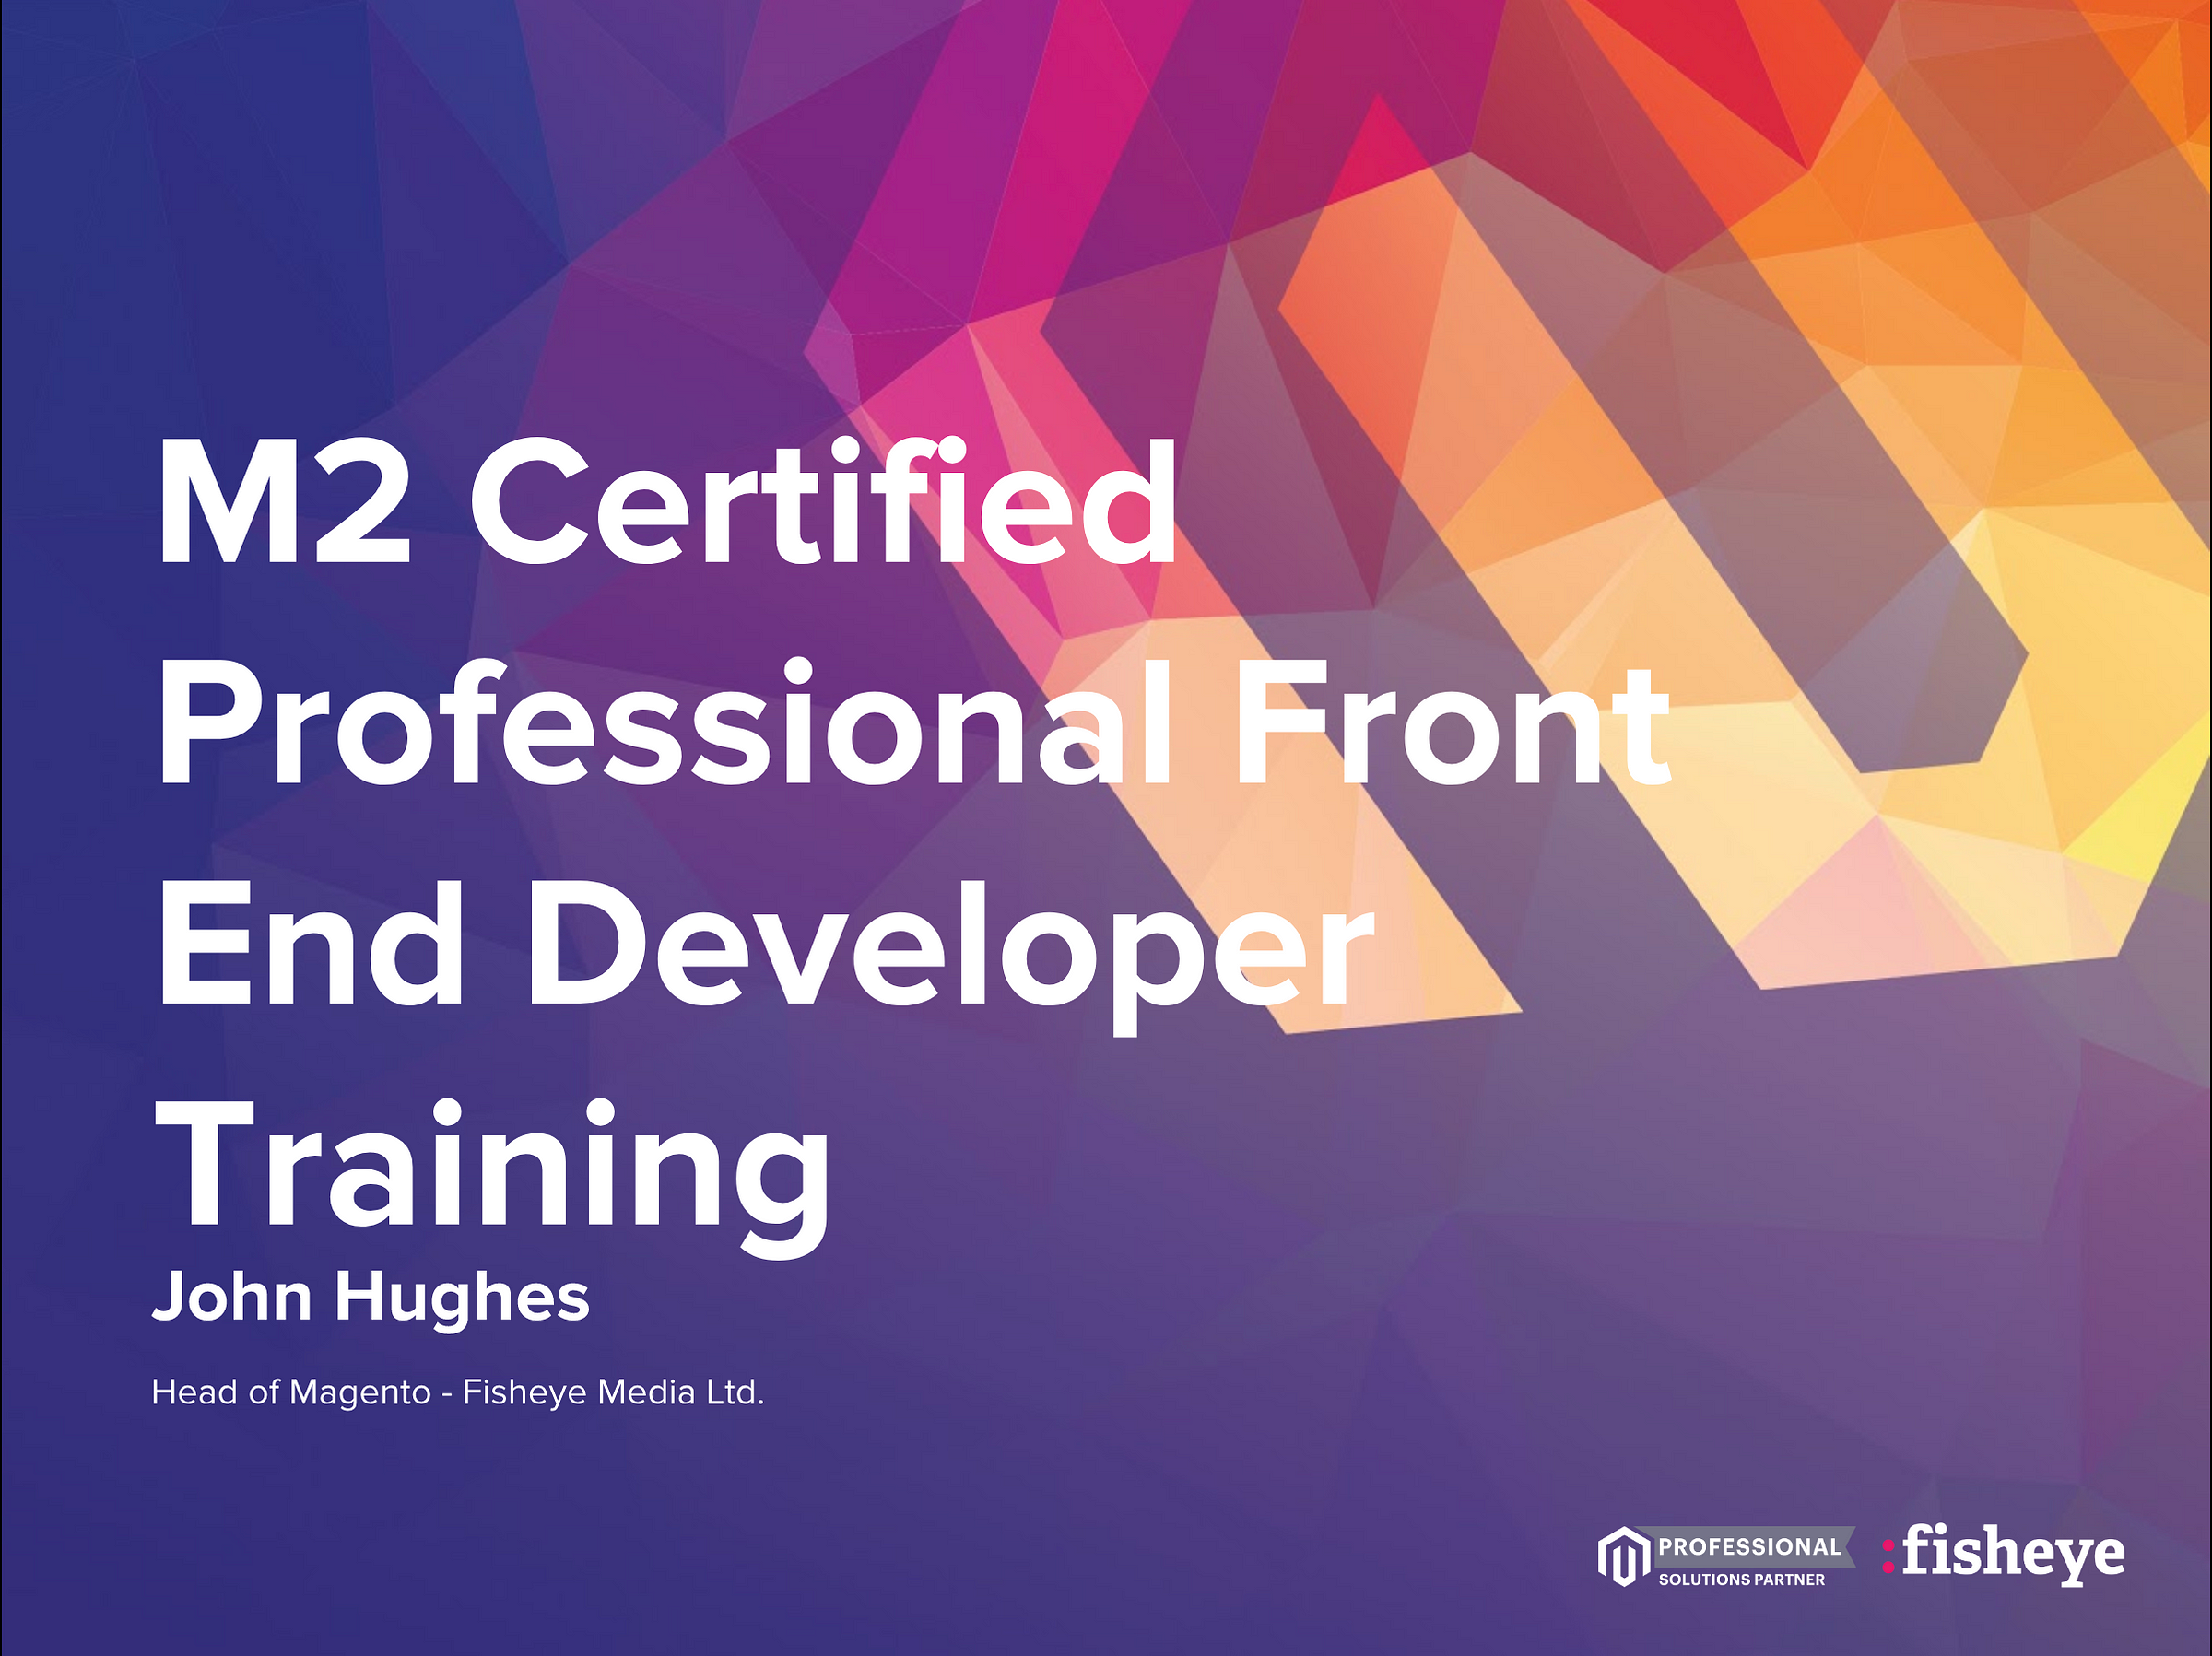 M2 Certified Professional Front End Developer Training